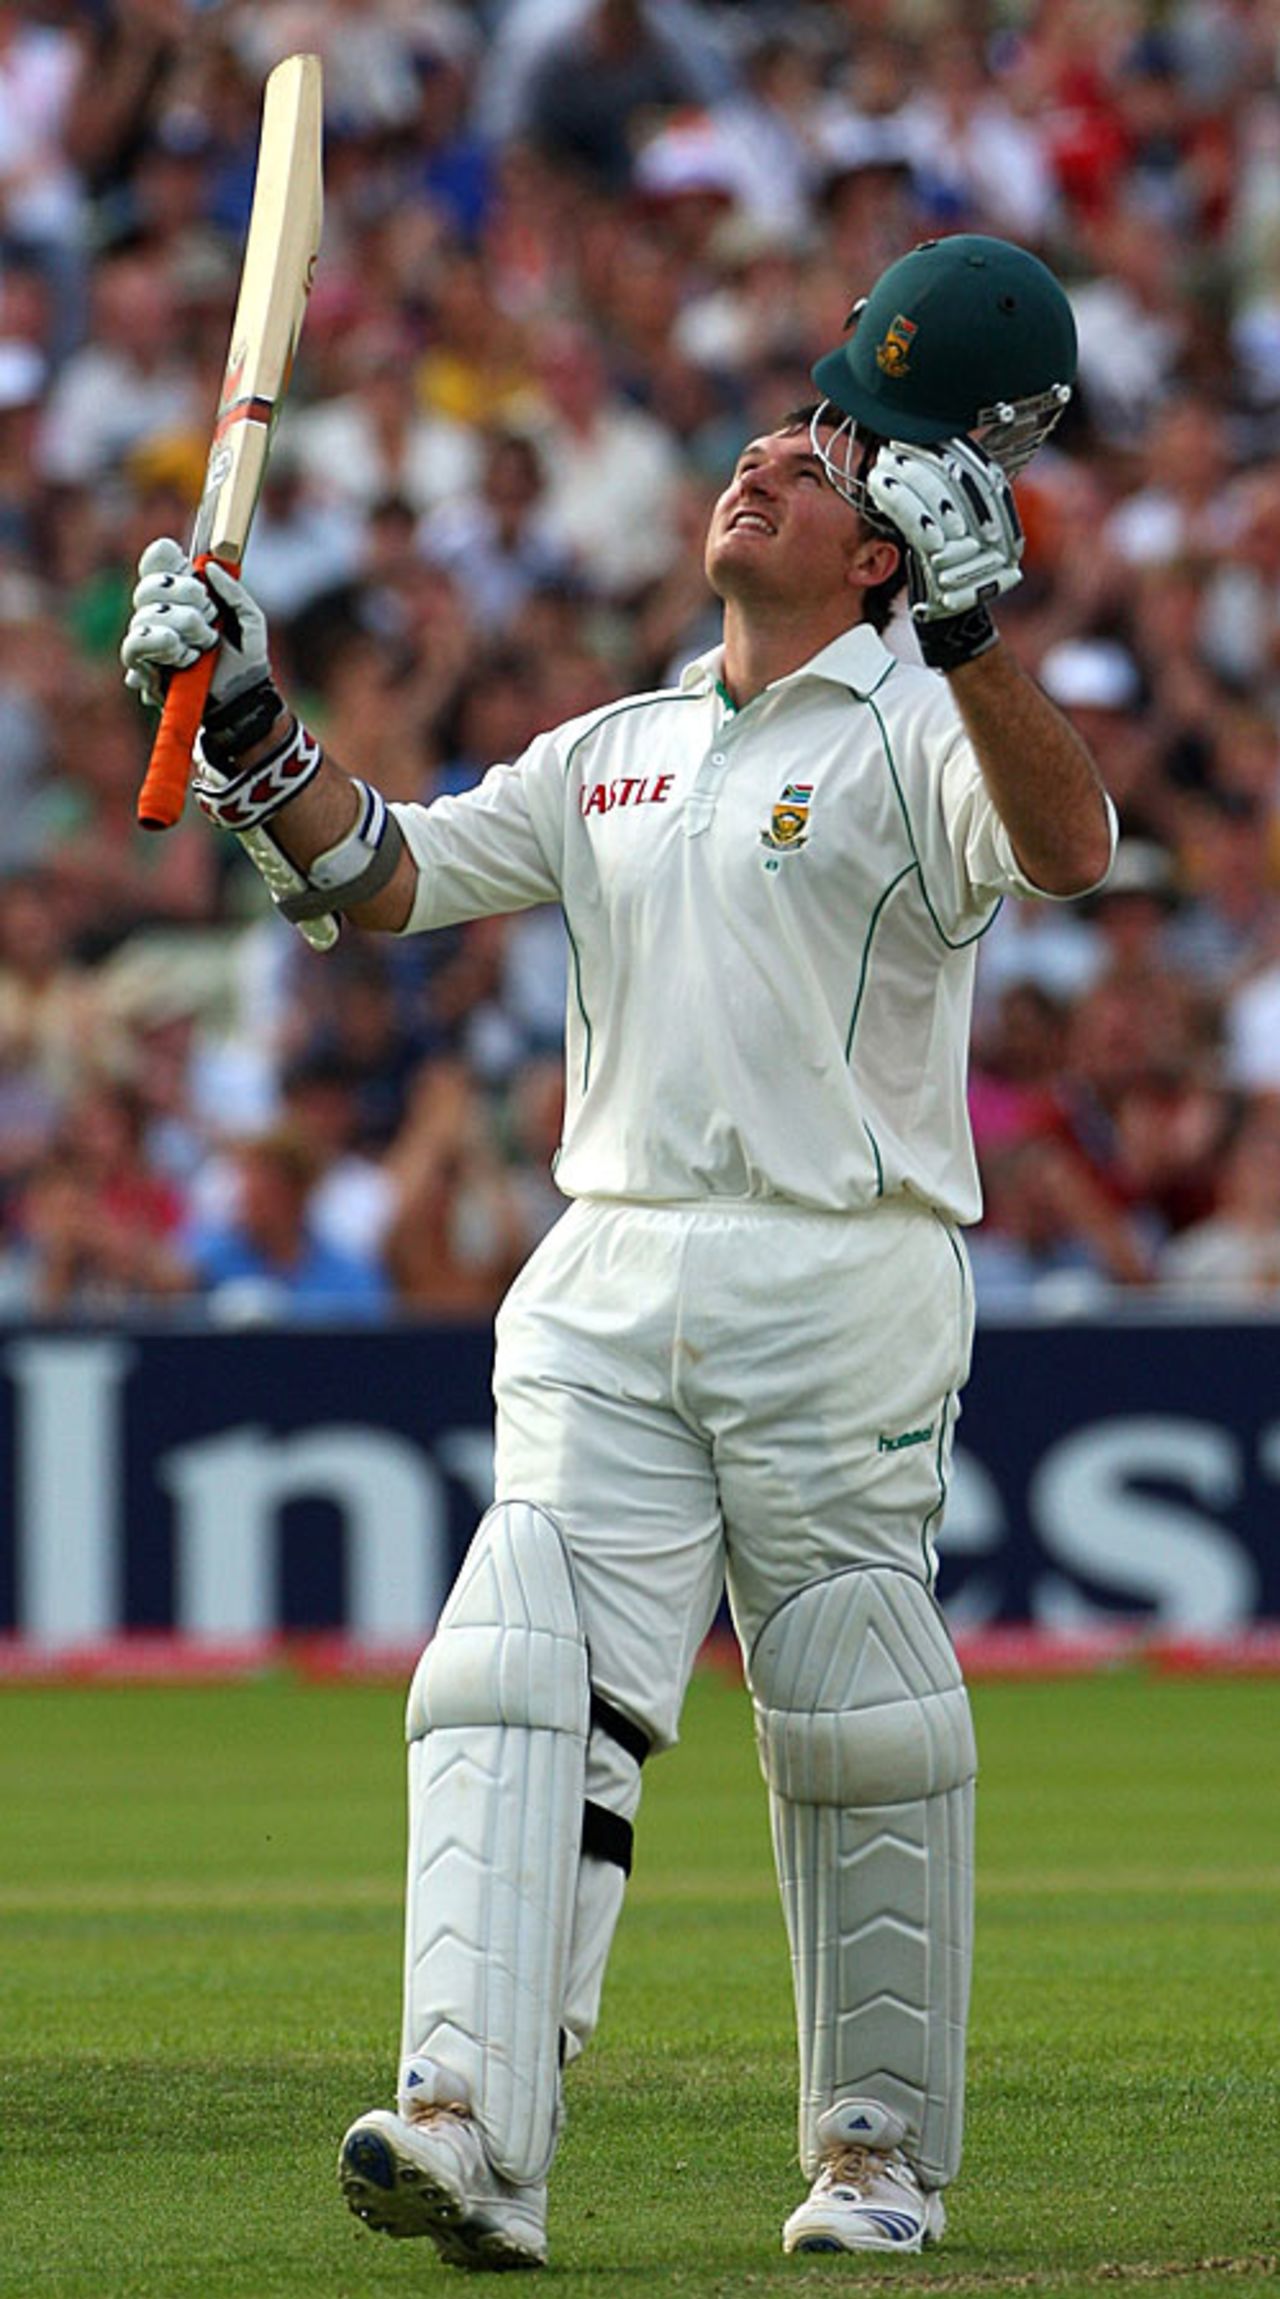 Graeme Smith raises his arms to celebrate his magnificent hundred, England v South Africa, 3rd Test, Edgbaston, August 2, 2008